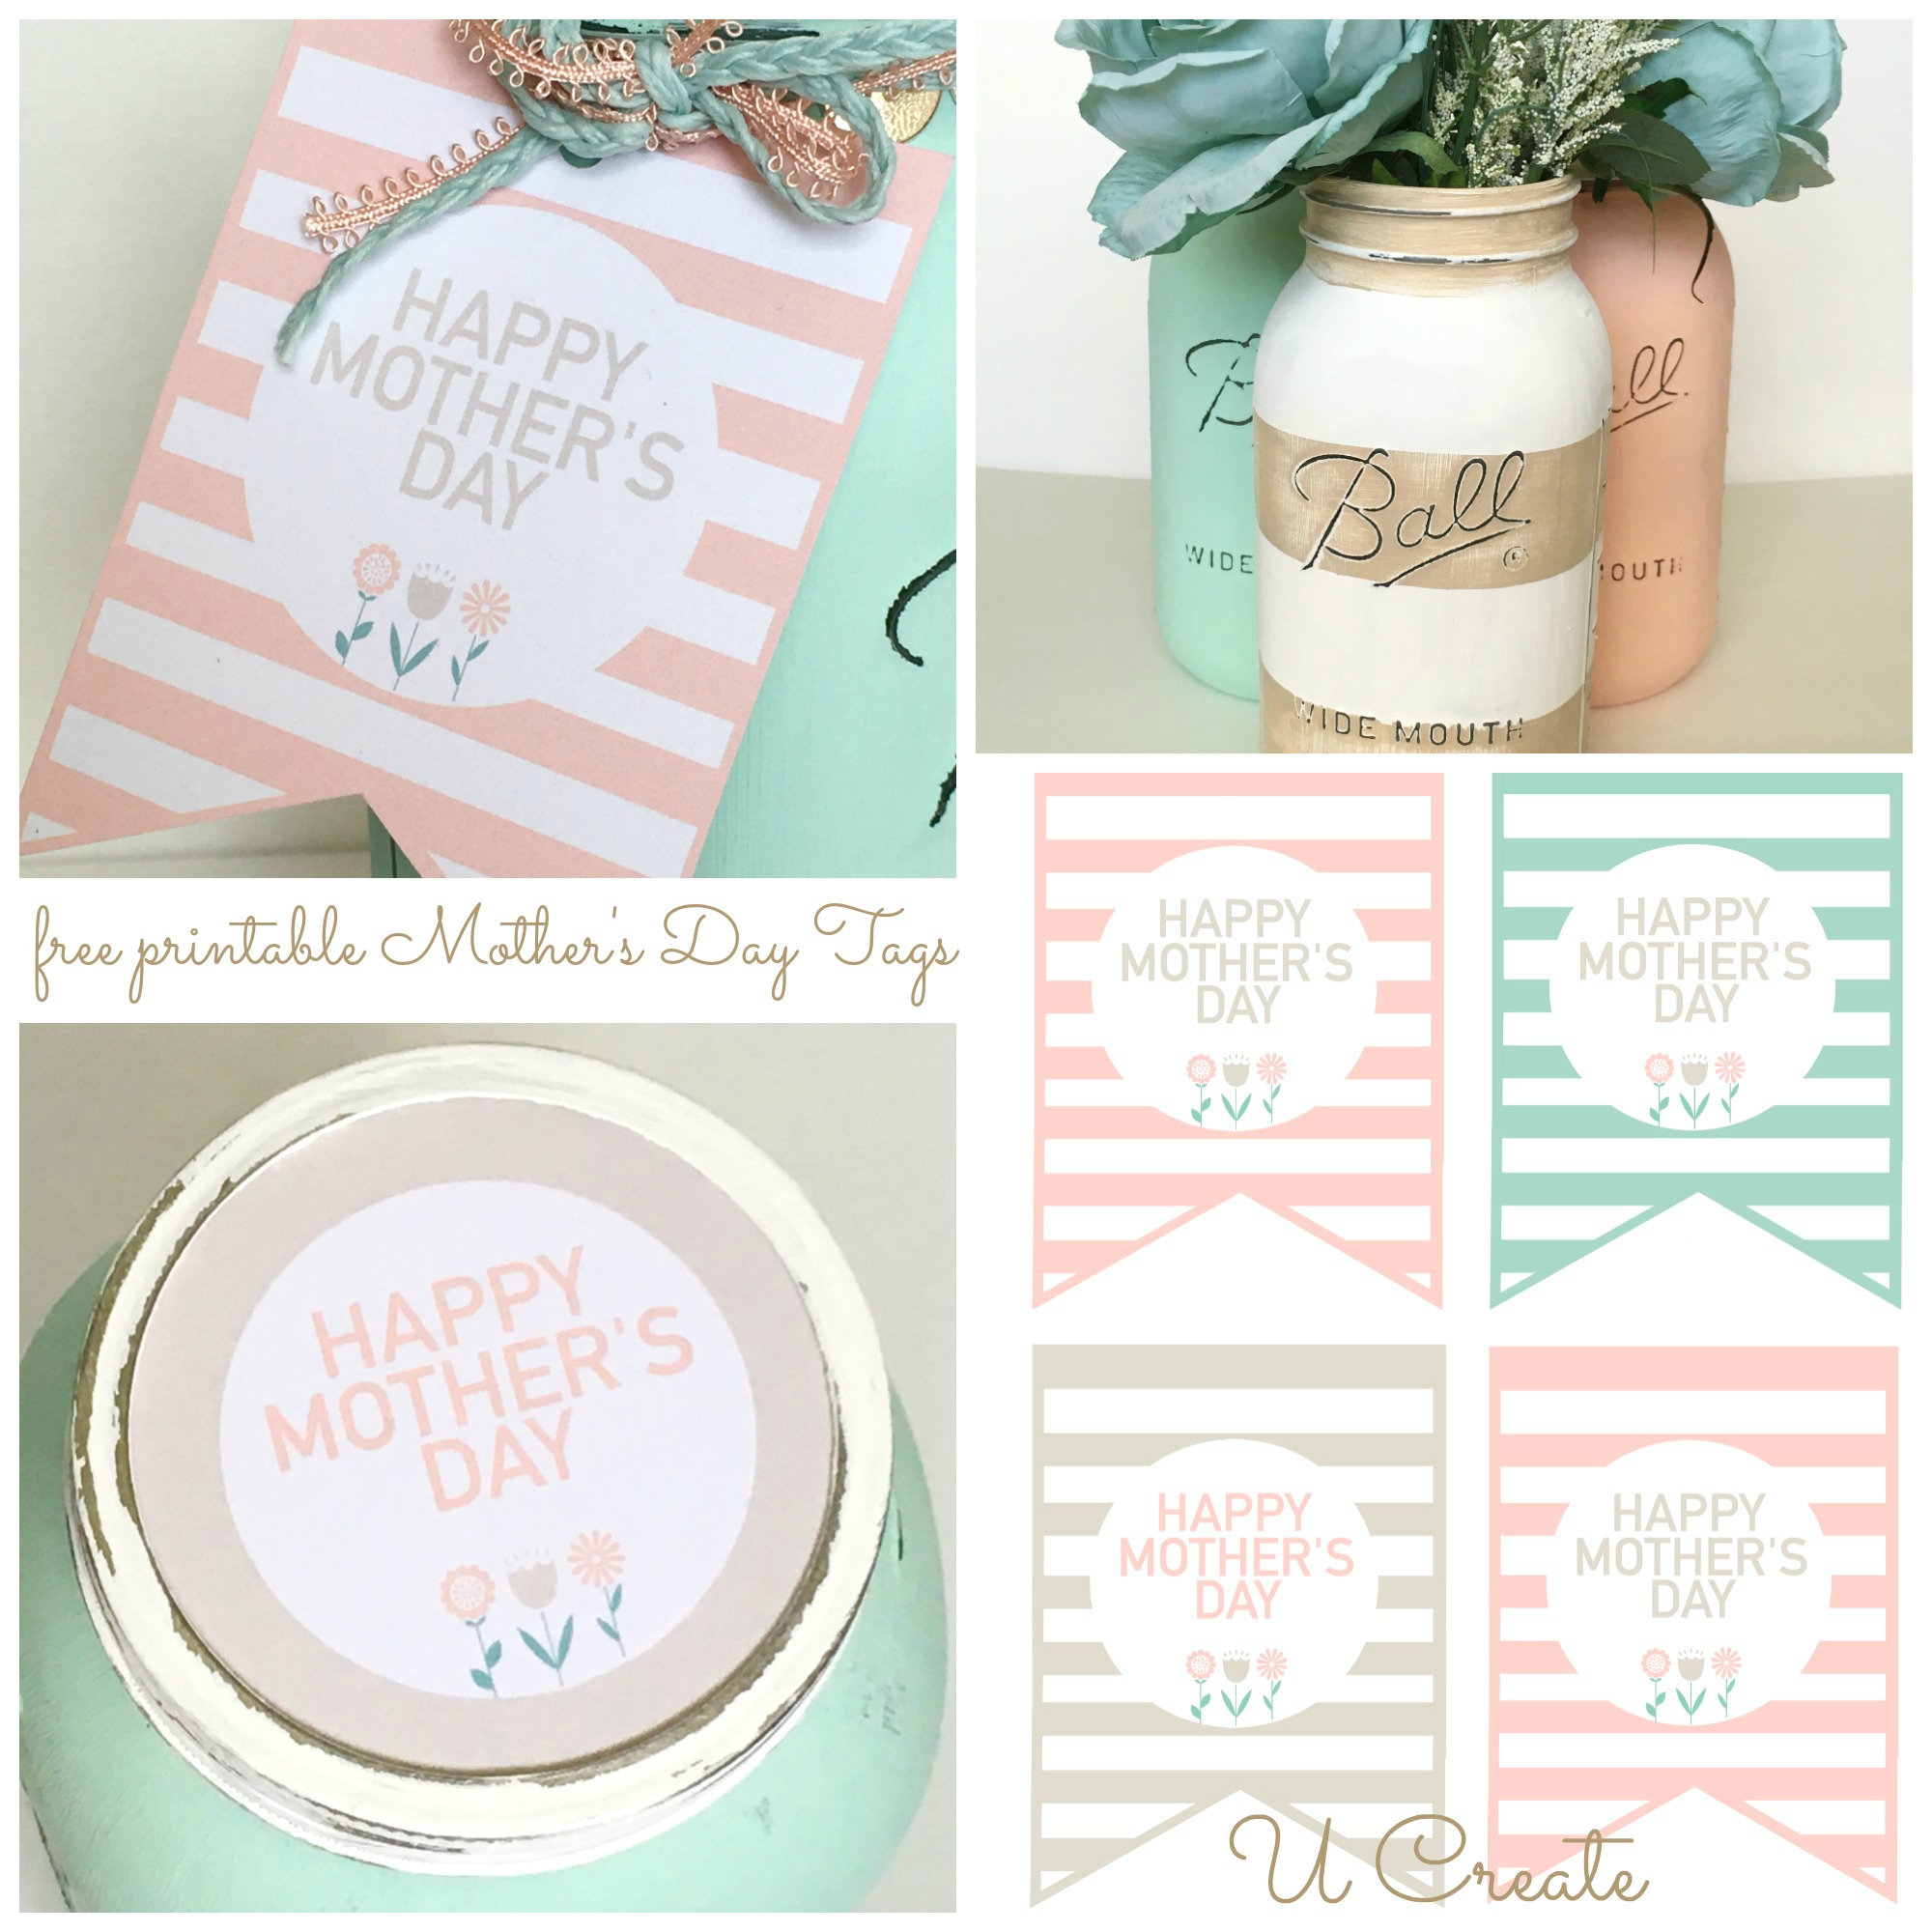 Free Printable Mother's Day Tags (and lid covers) by U Create